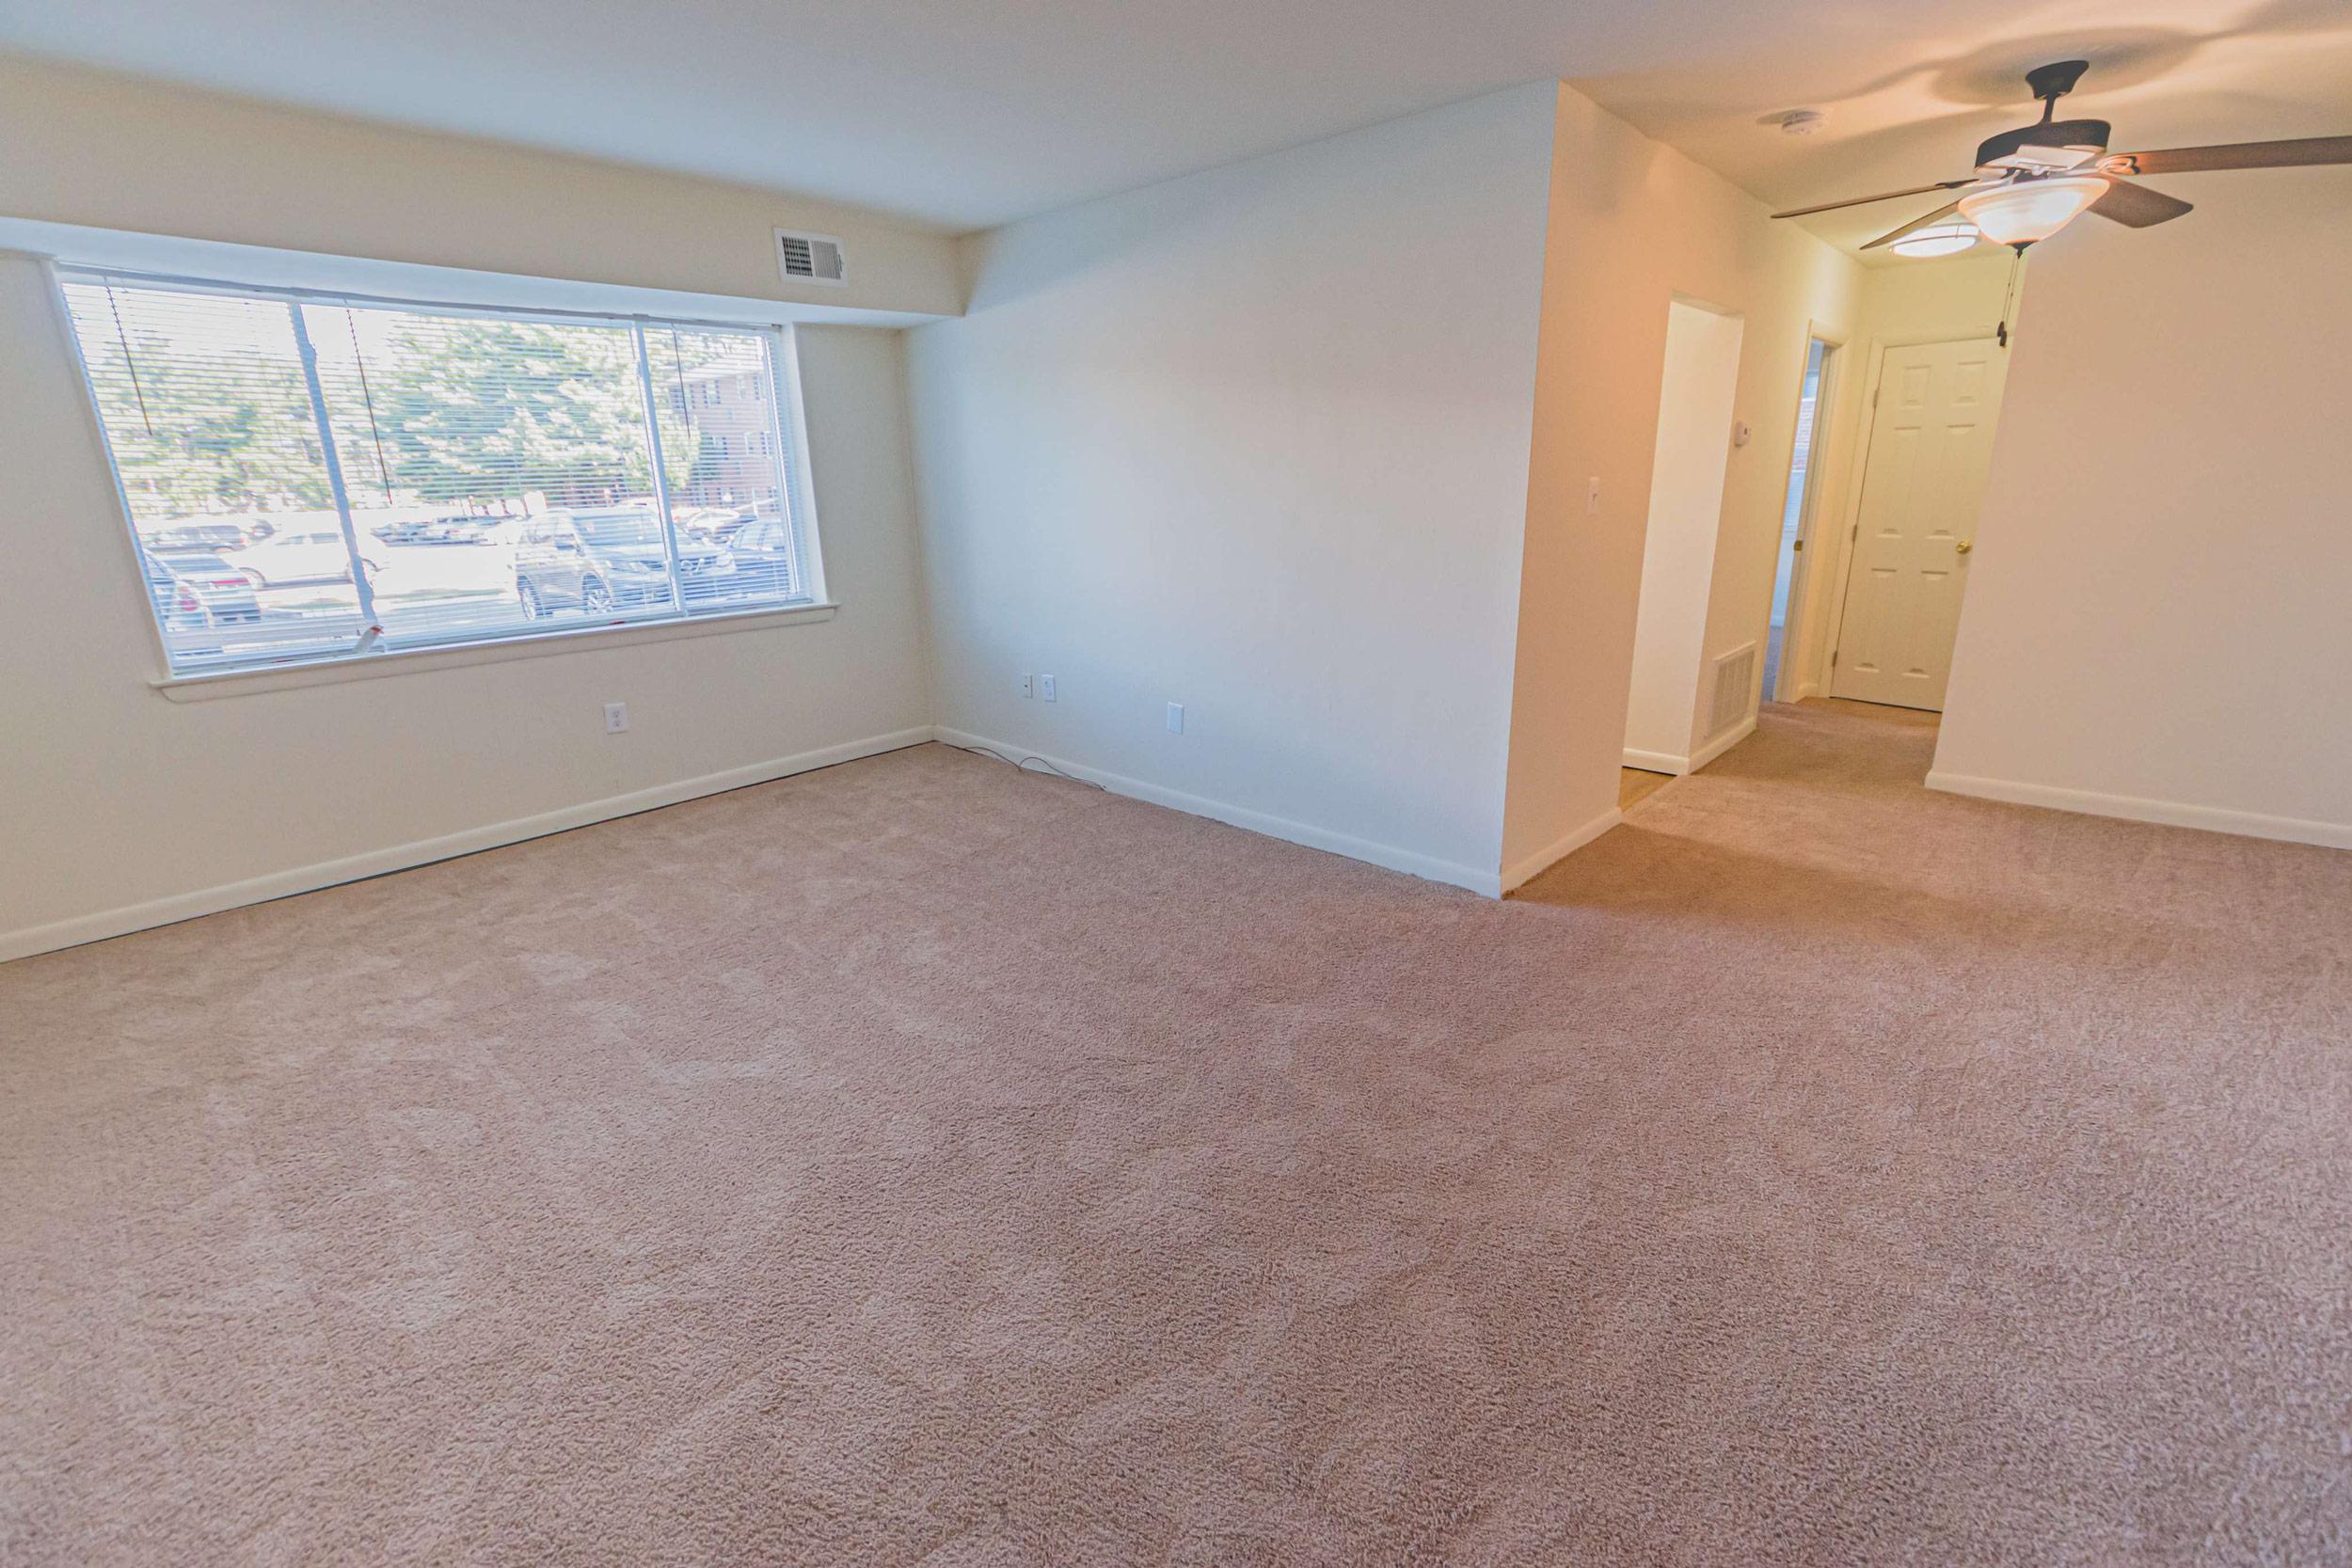 The living room area of an apartment, fitted with carpet flooring, a closet, and a huge window